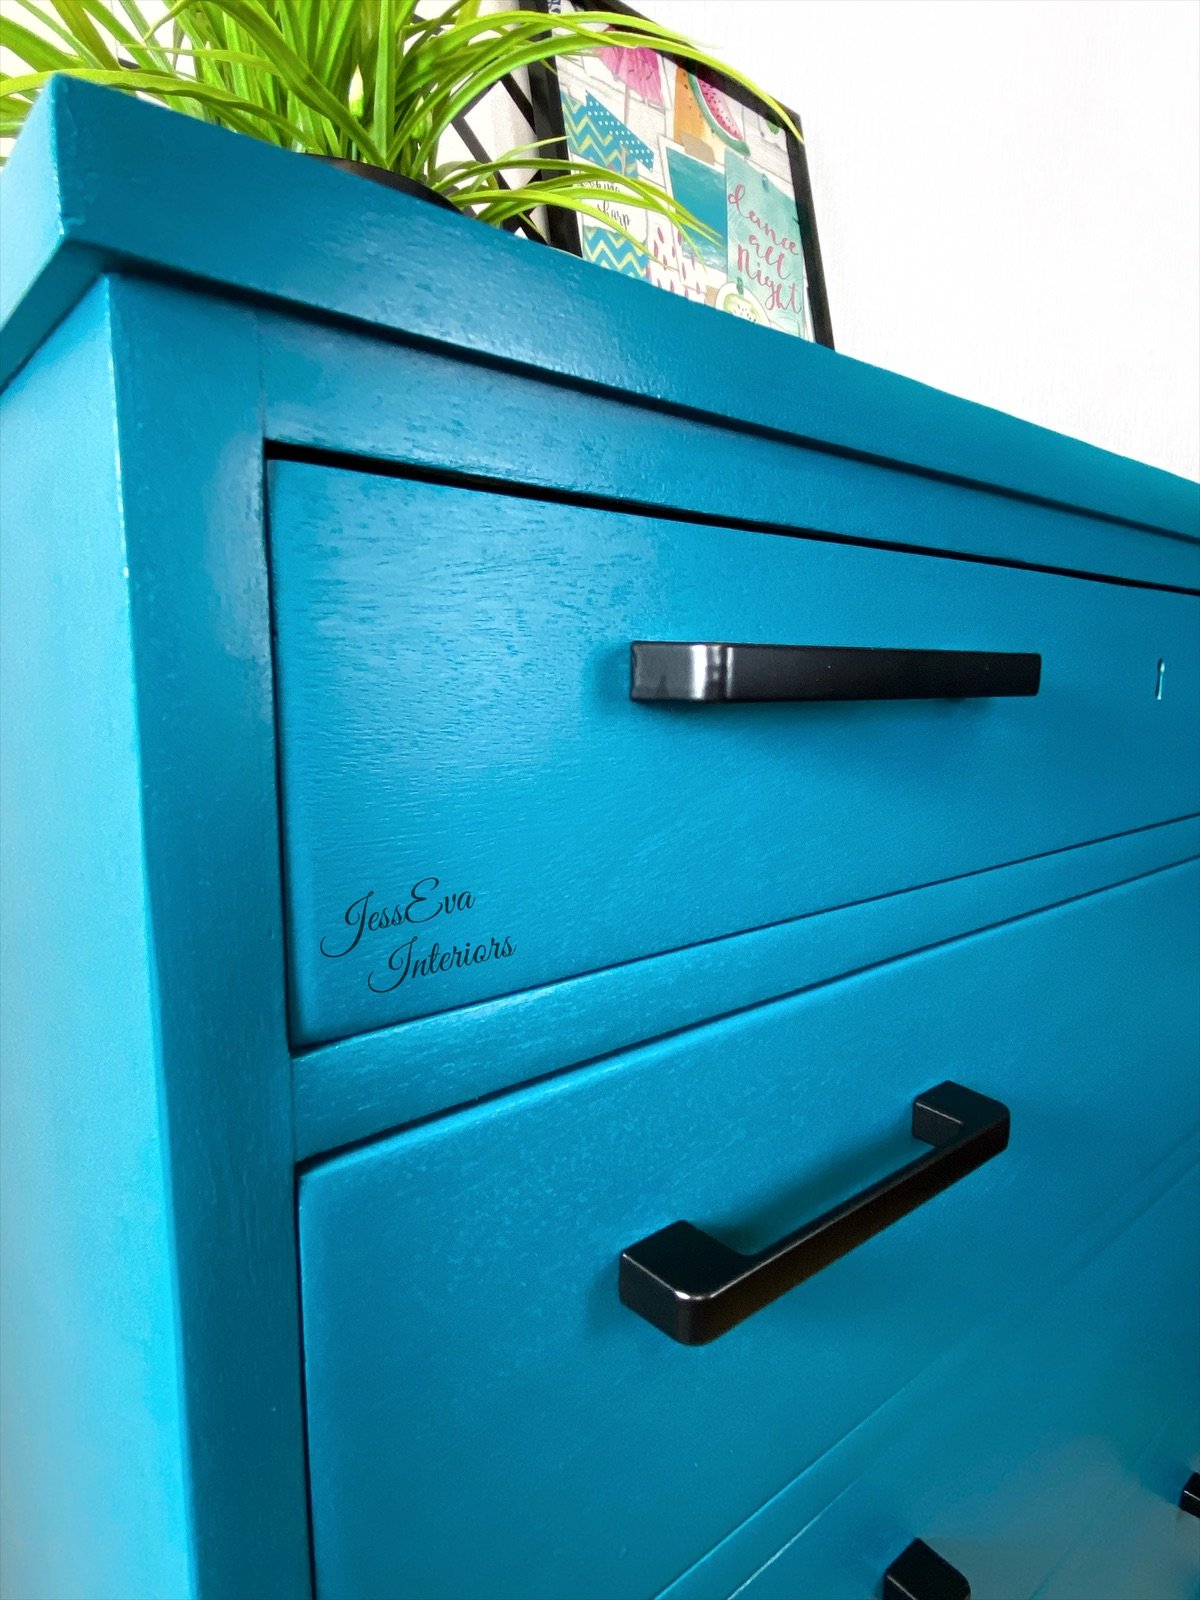 Retro Mid Century Modern Danish Made Large CHEST OF DRAWERS / TALLBOY painted in teal blue